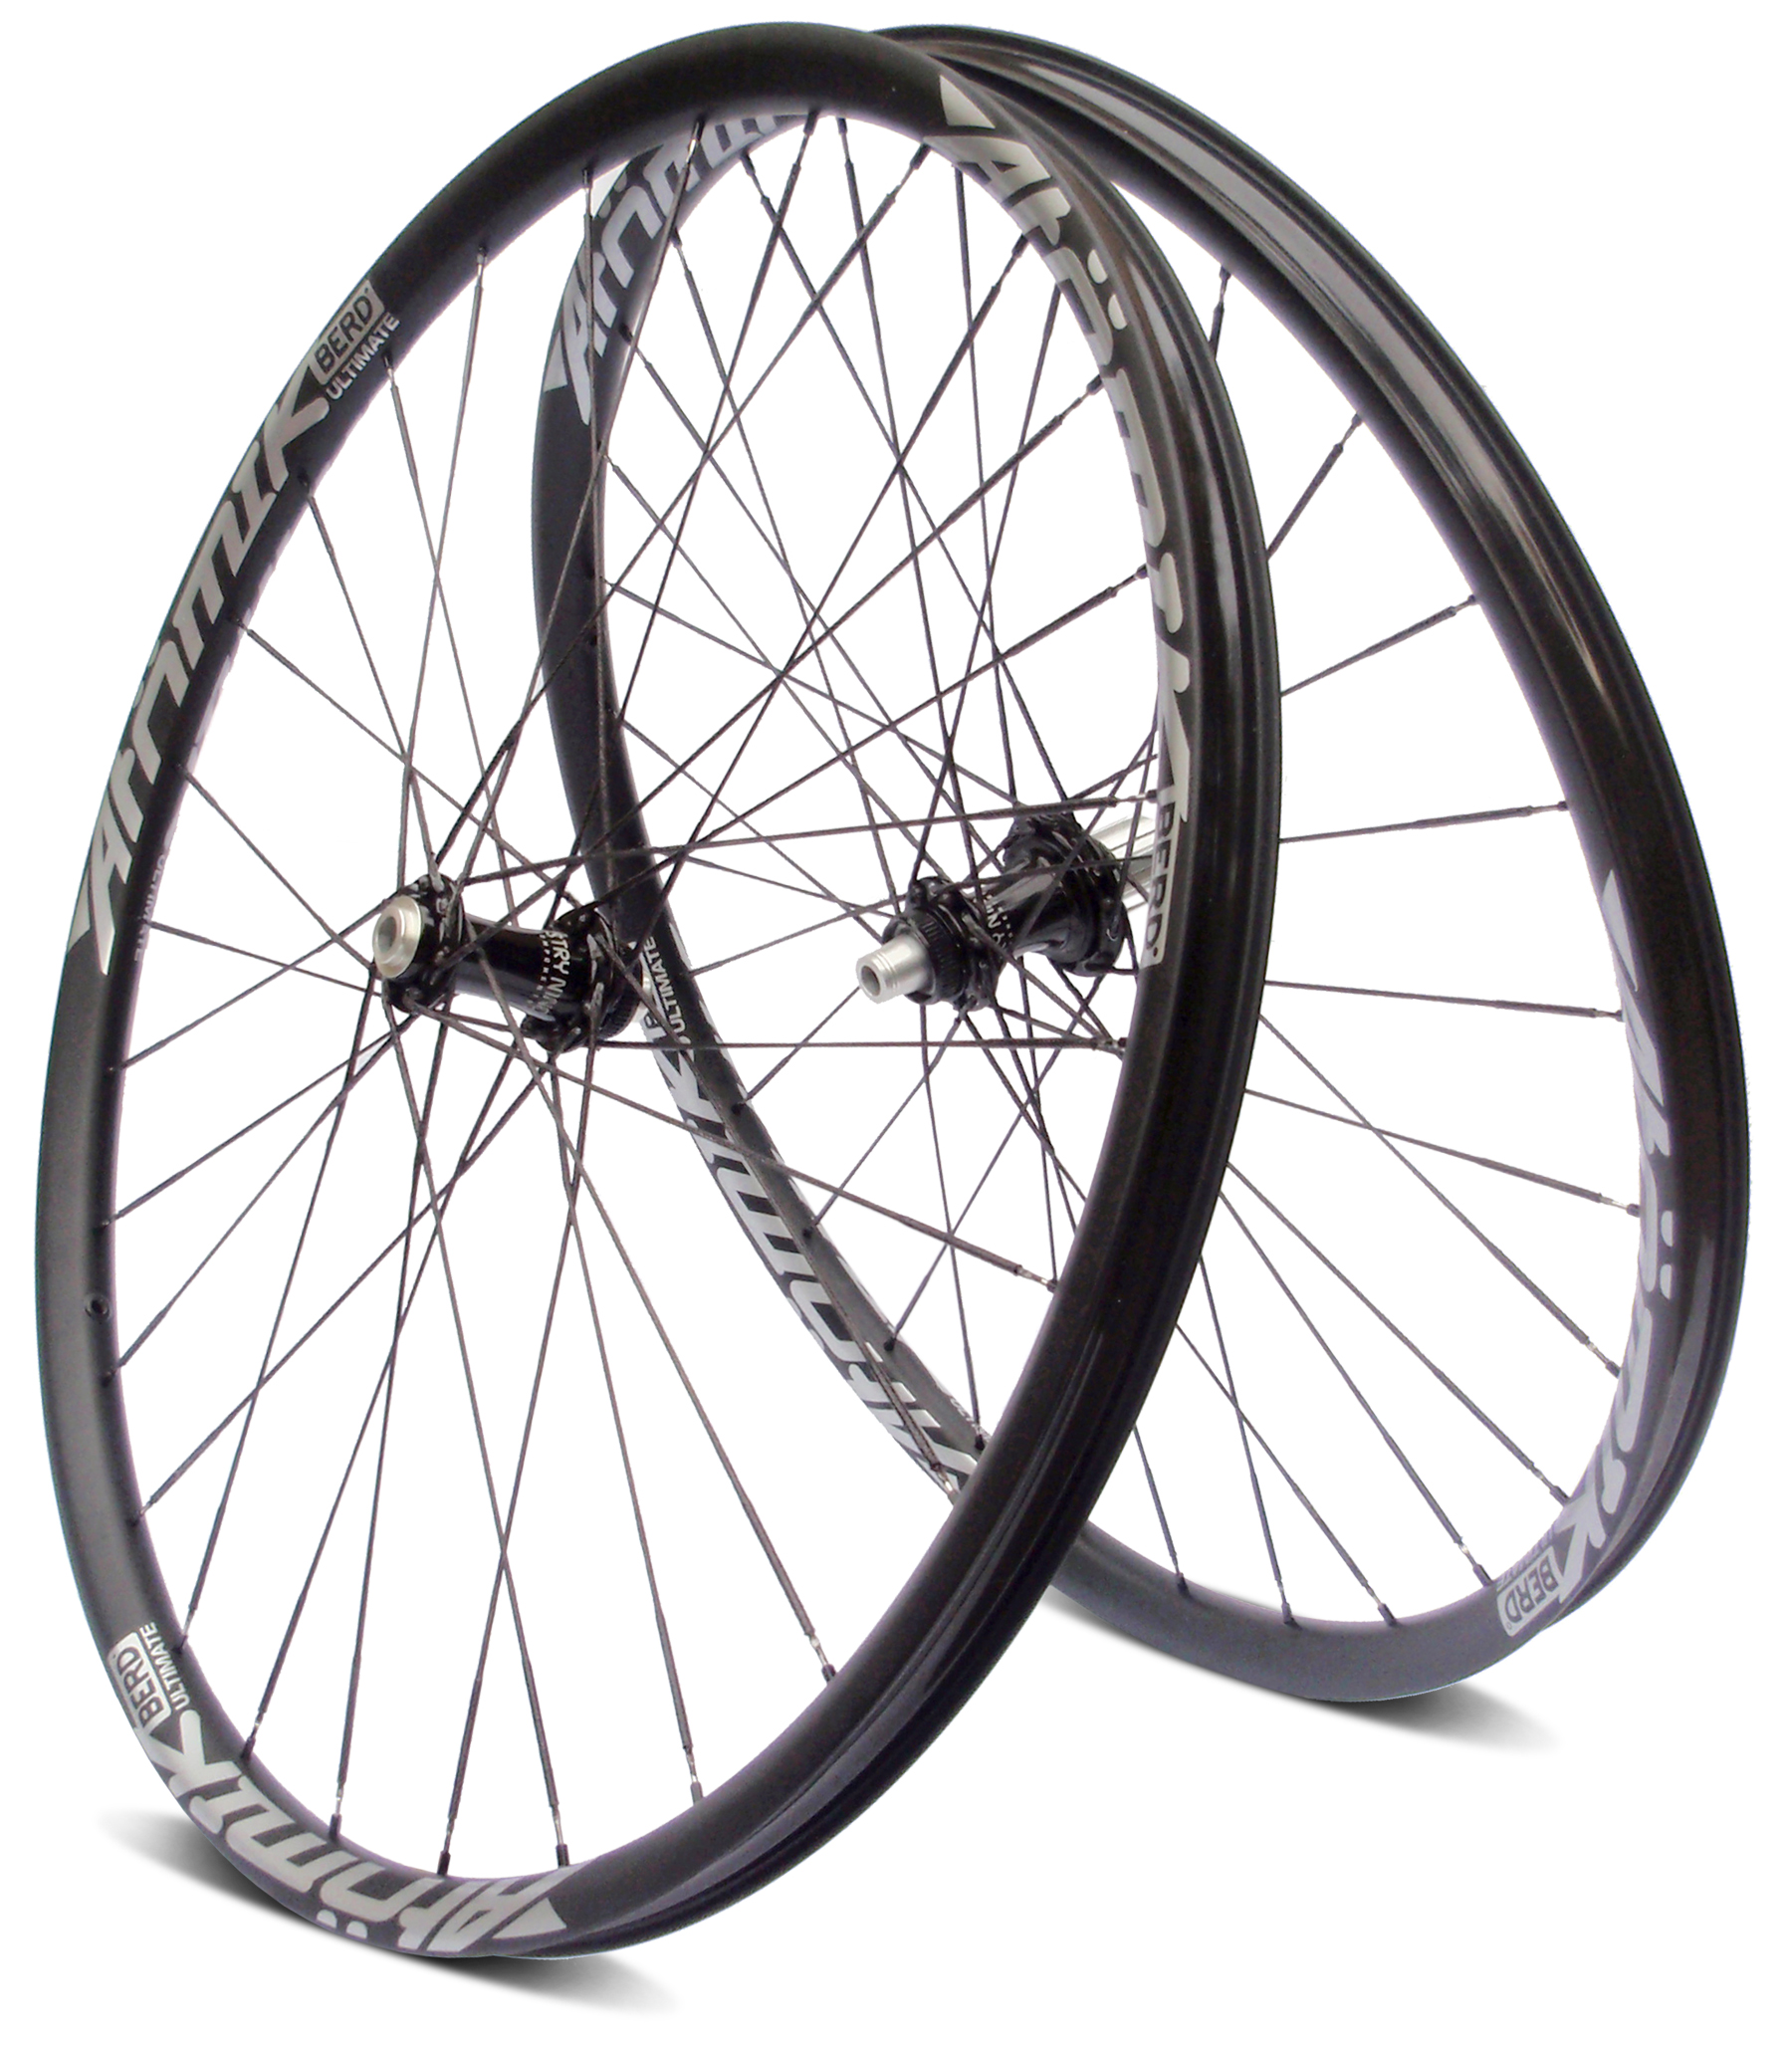 Atomik x Berd Carbon Ultimate Wheelset brings new color to "world's lightest spokes"